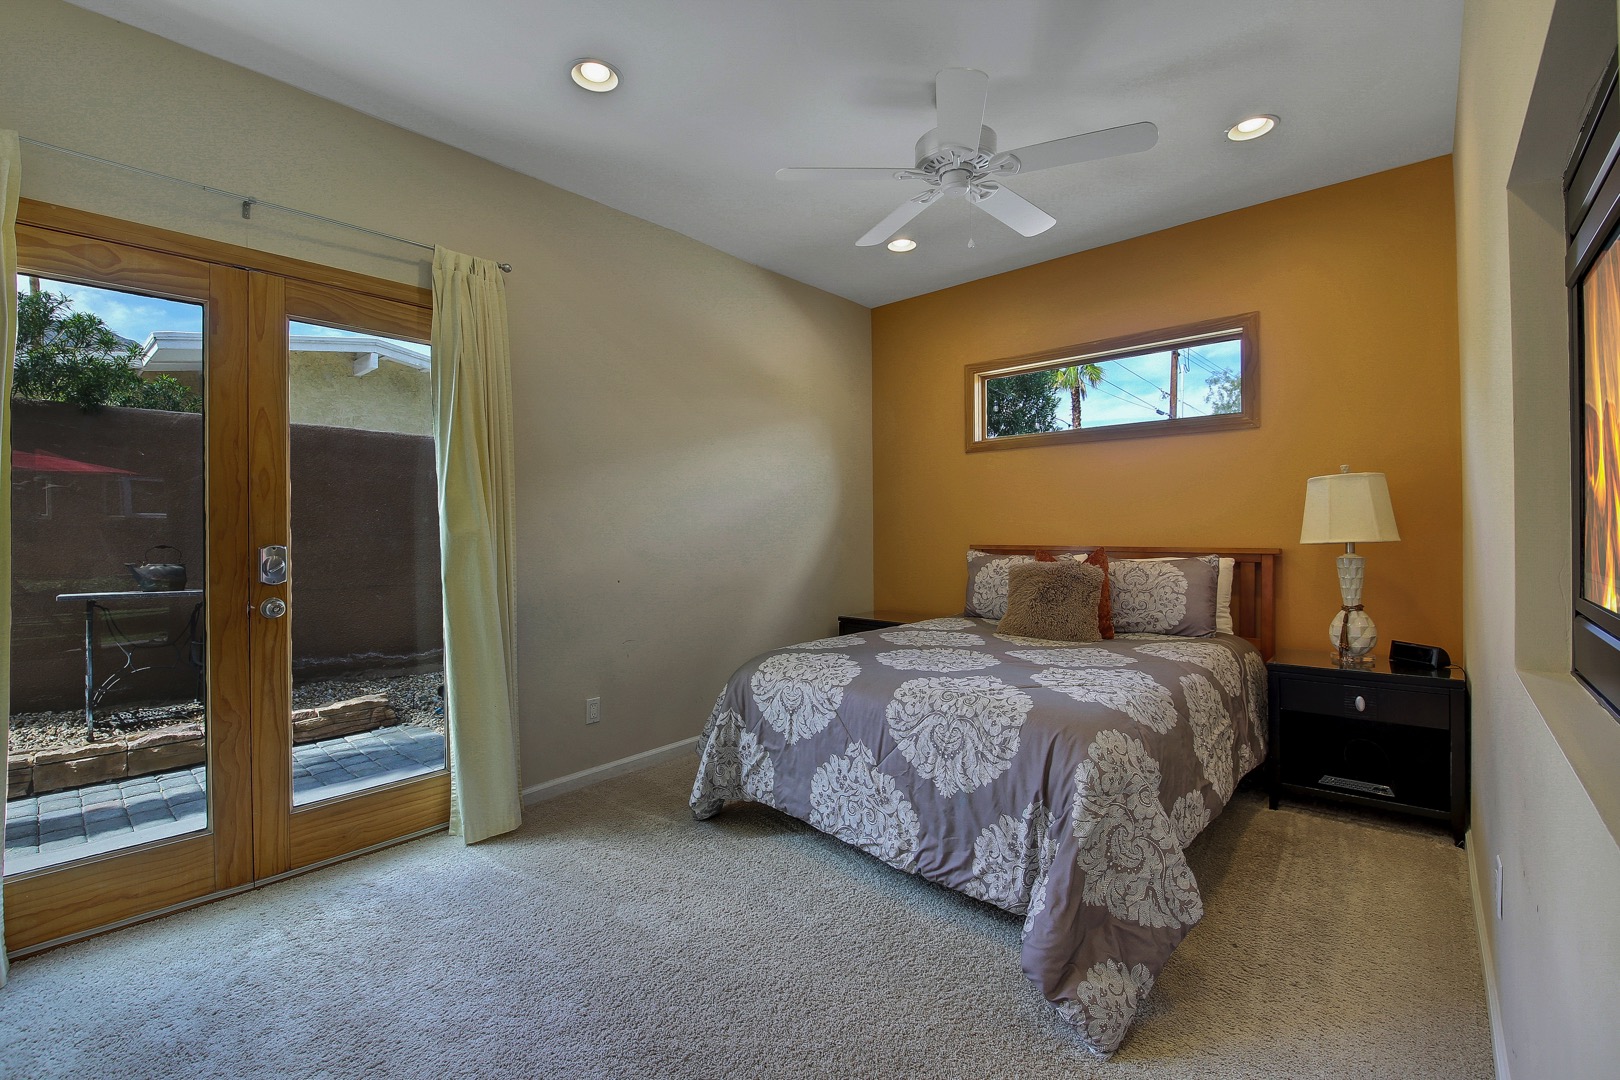 Casita Suite 2 features a Queen-sized bed, Smart TV, two Twin rollaways